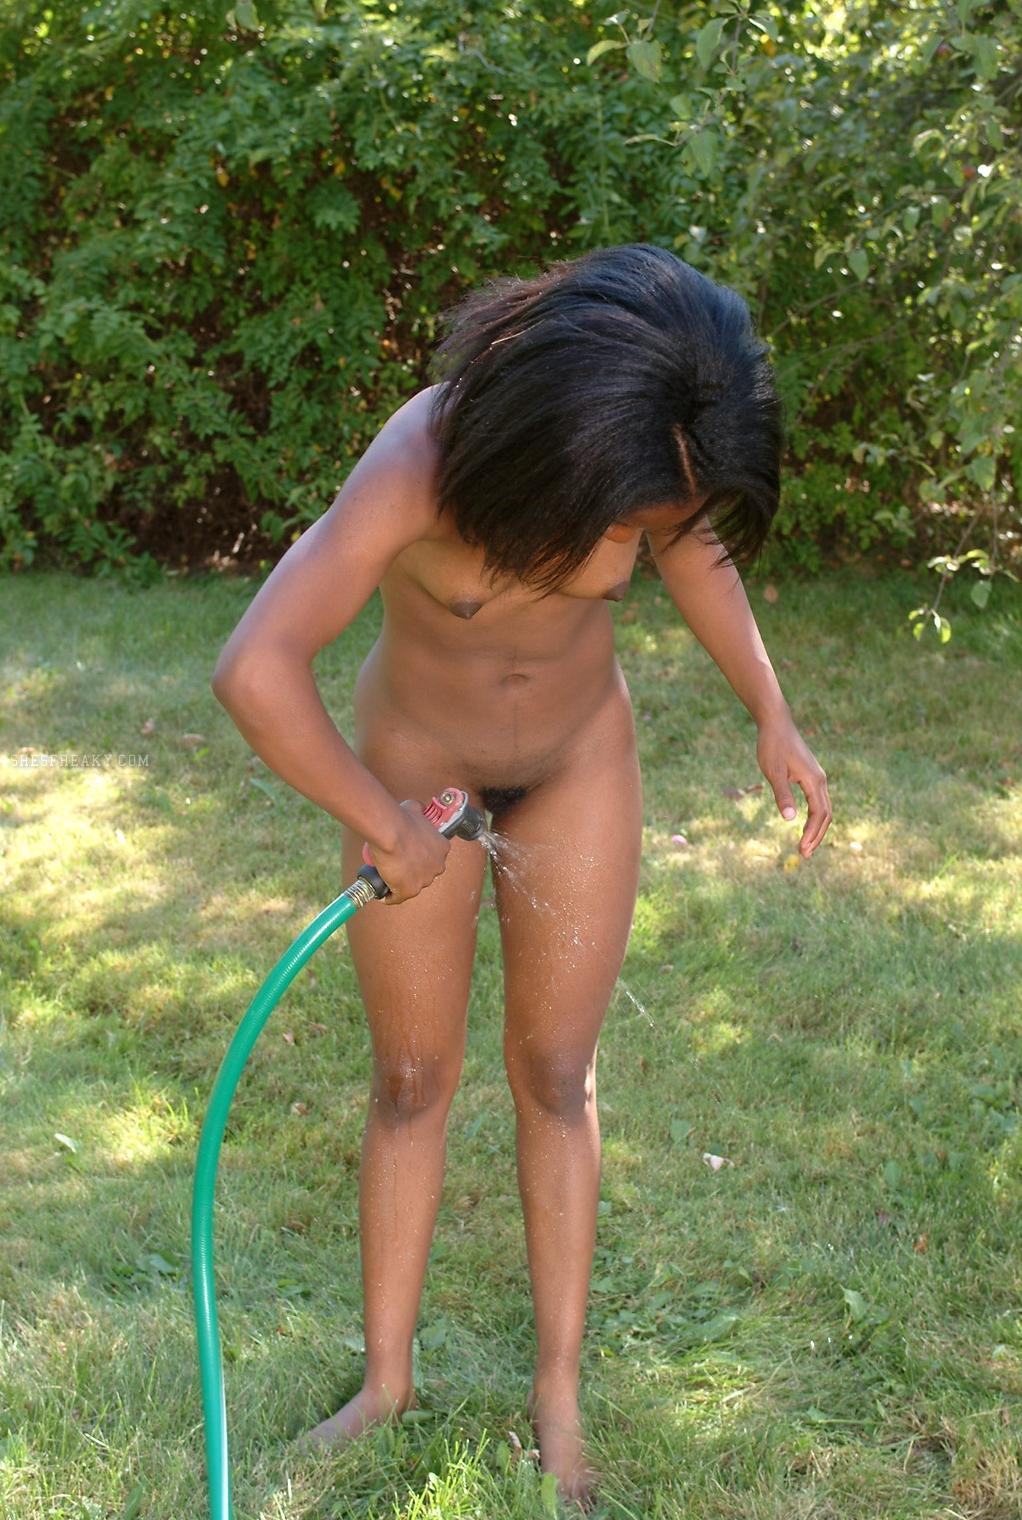 Naked Women Doing Yard W picture